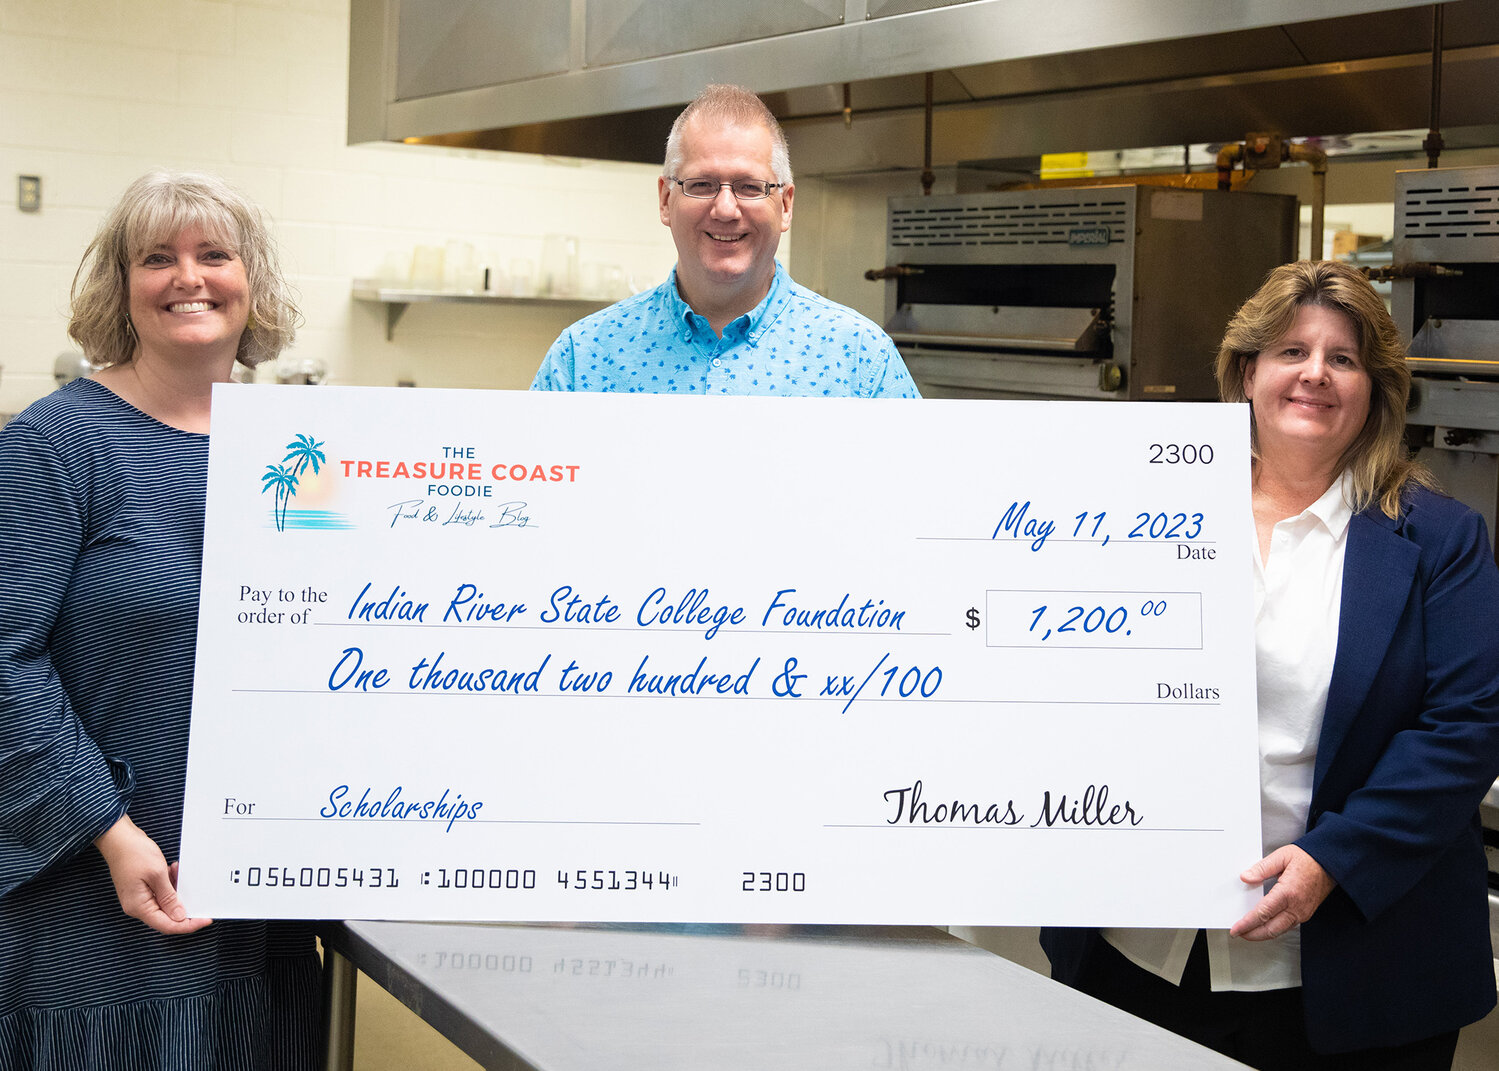 Creator of the popular “Treasure Coast Foodie” Social Media account Thomas Miller stopped by IRSC’s Richardson center in Vero Beach to deliver a $1200 check in support of scholarships for culinary students. Indian River State College’s Culinary program offers countless opportunities for burgeoning chefs to interact with chefs in the community. Thomas hopes his contribution will help advance the culinary community of the Treasure Coast.